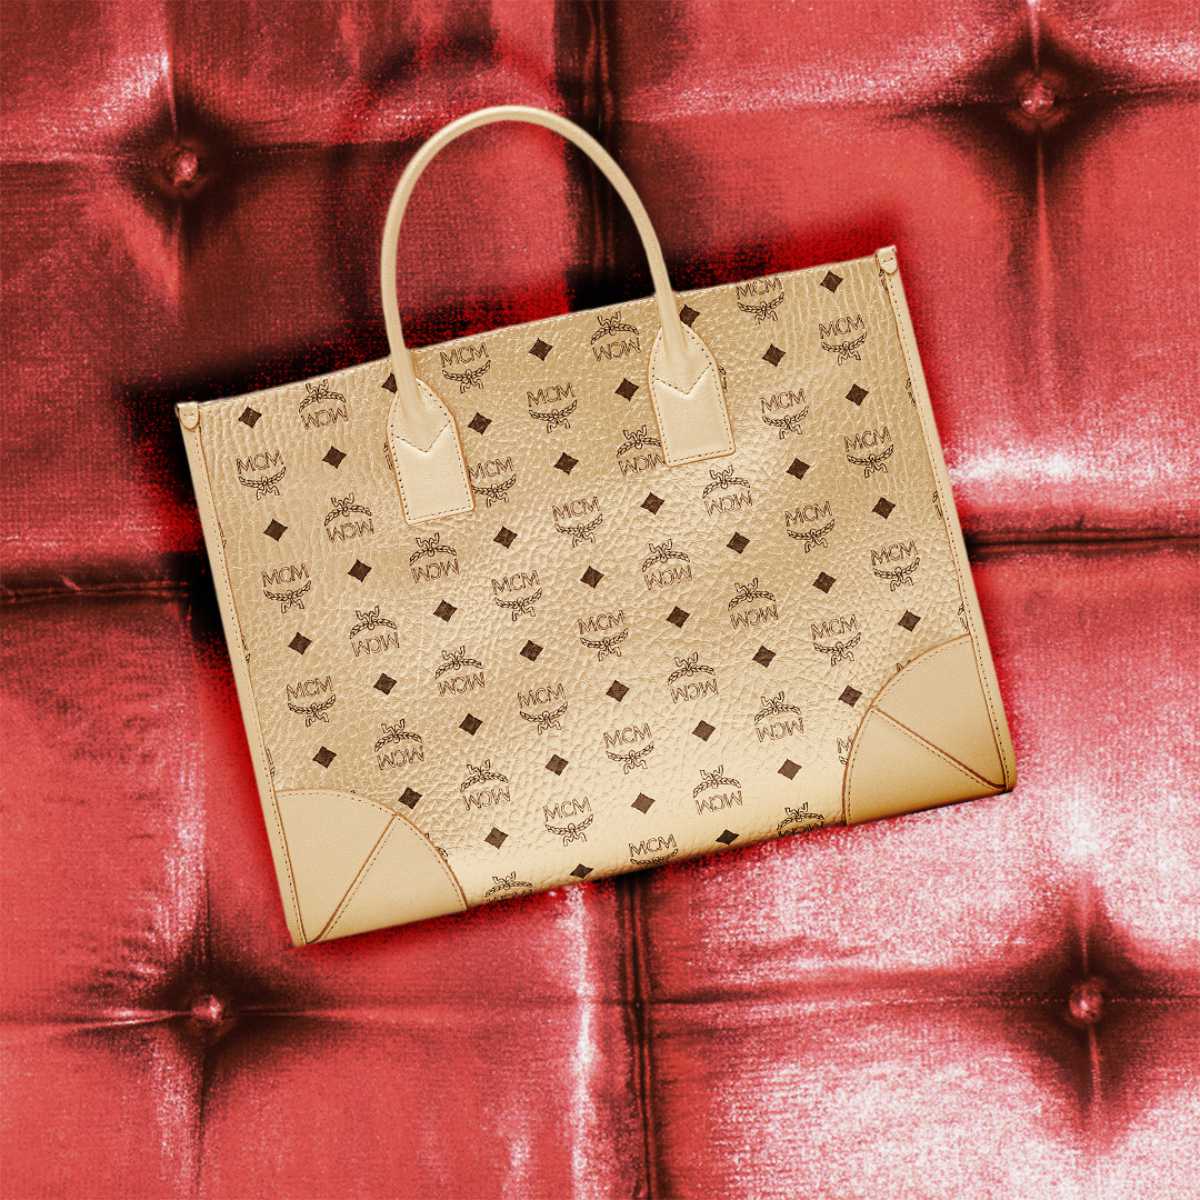 MCM Unveiled Larger Than Life Advent Calendar For Holiday 2022